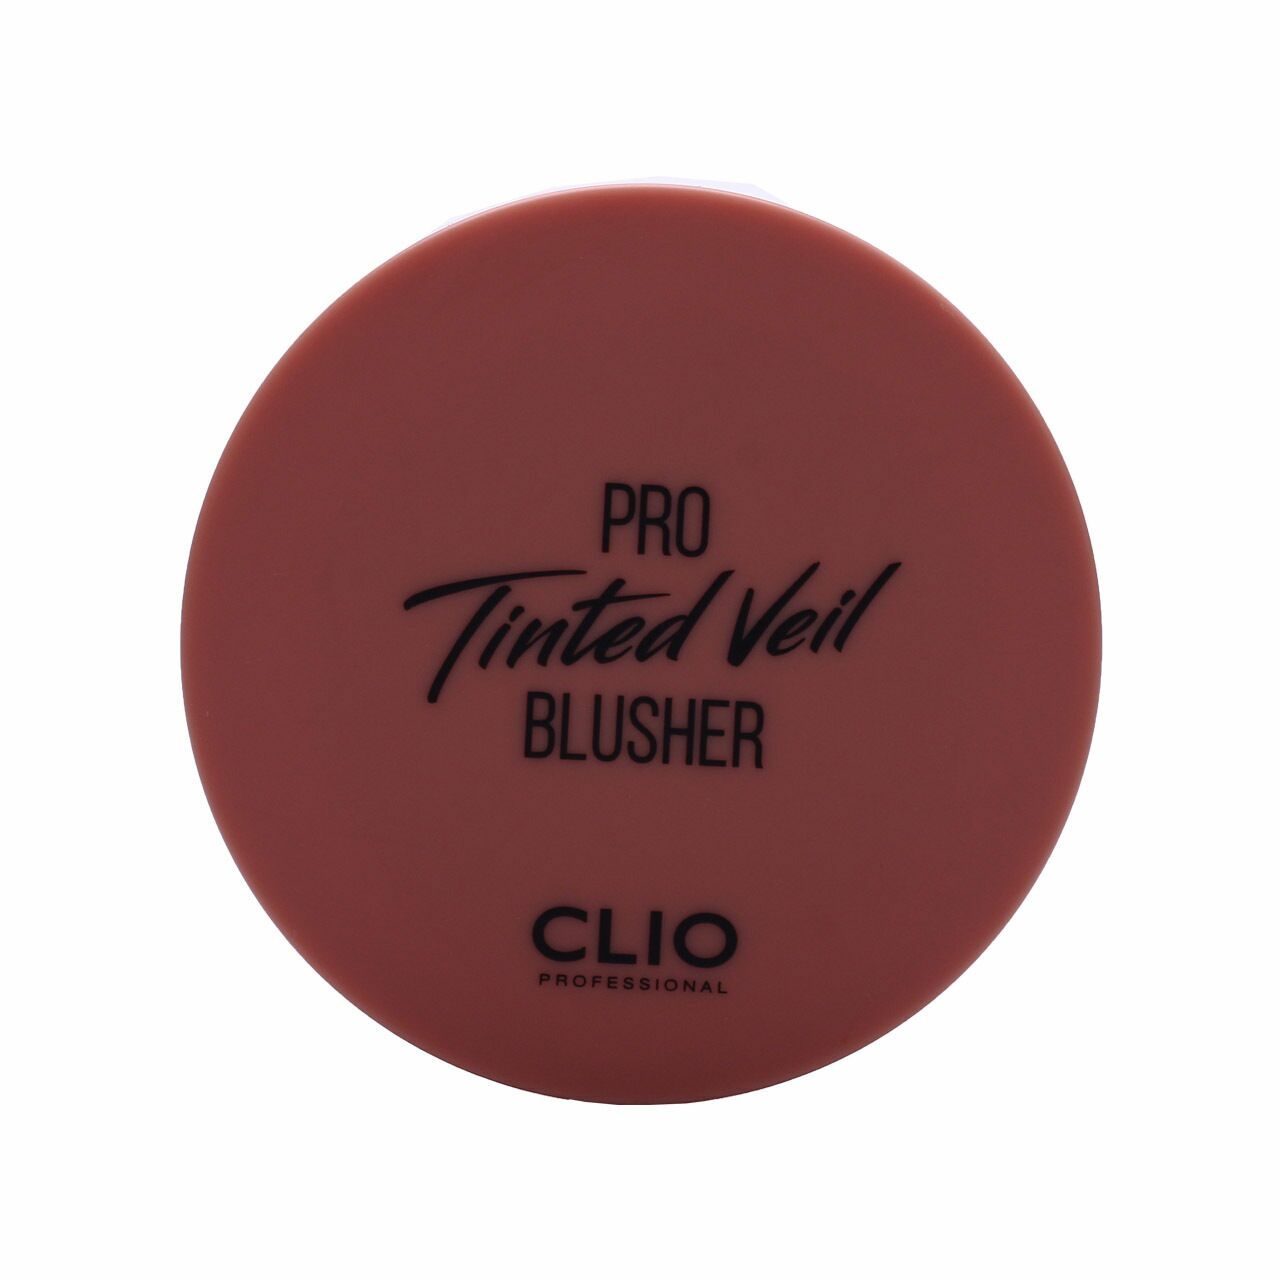 Clio Pro Tinted Veil Blusher Faces